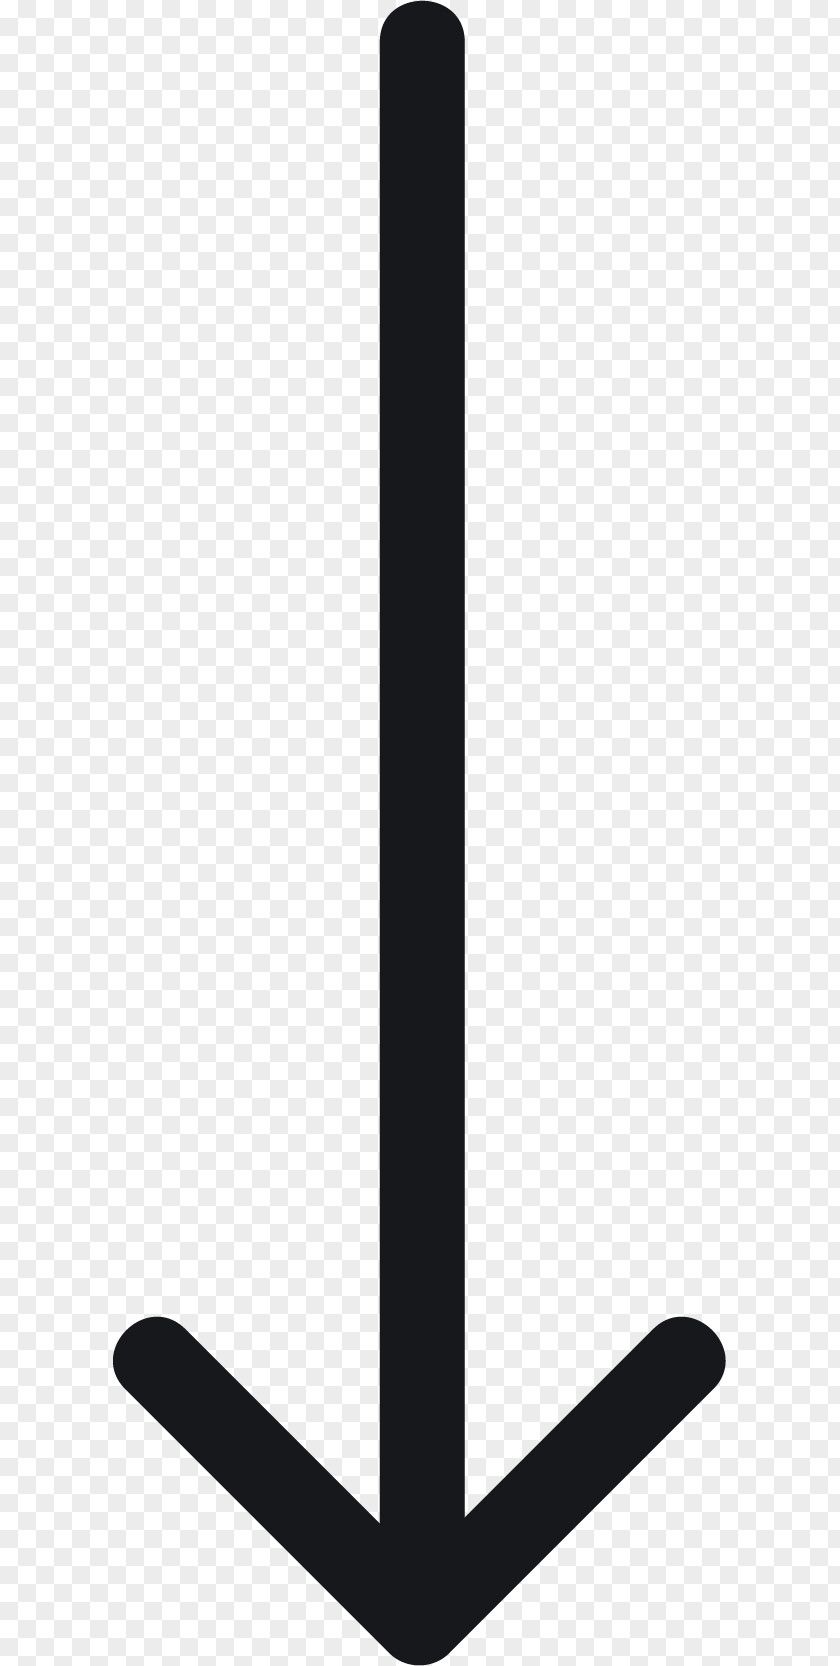 Down Arrow Black And White Pattern PNG